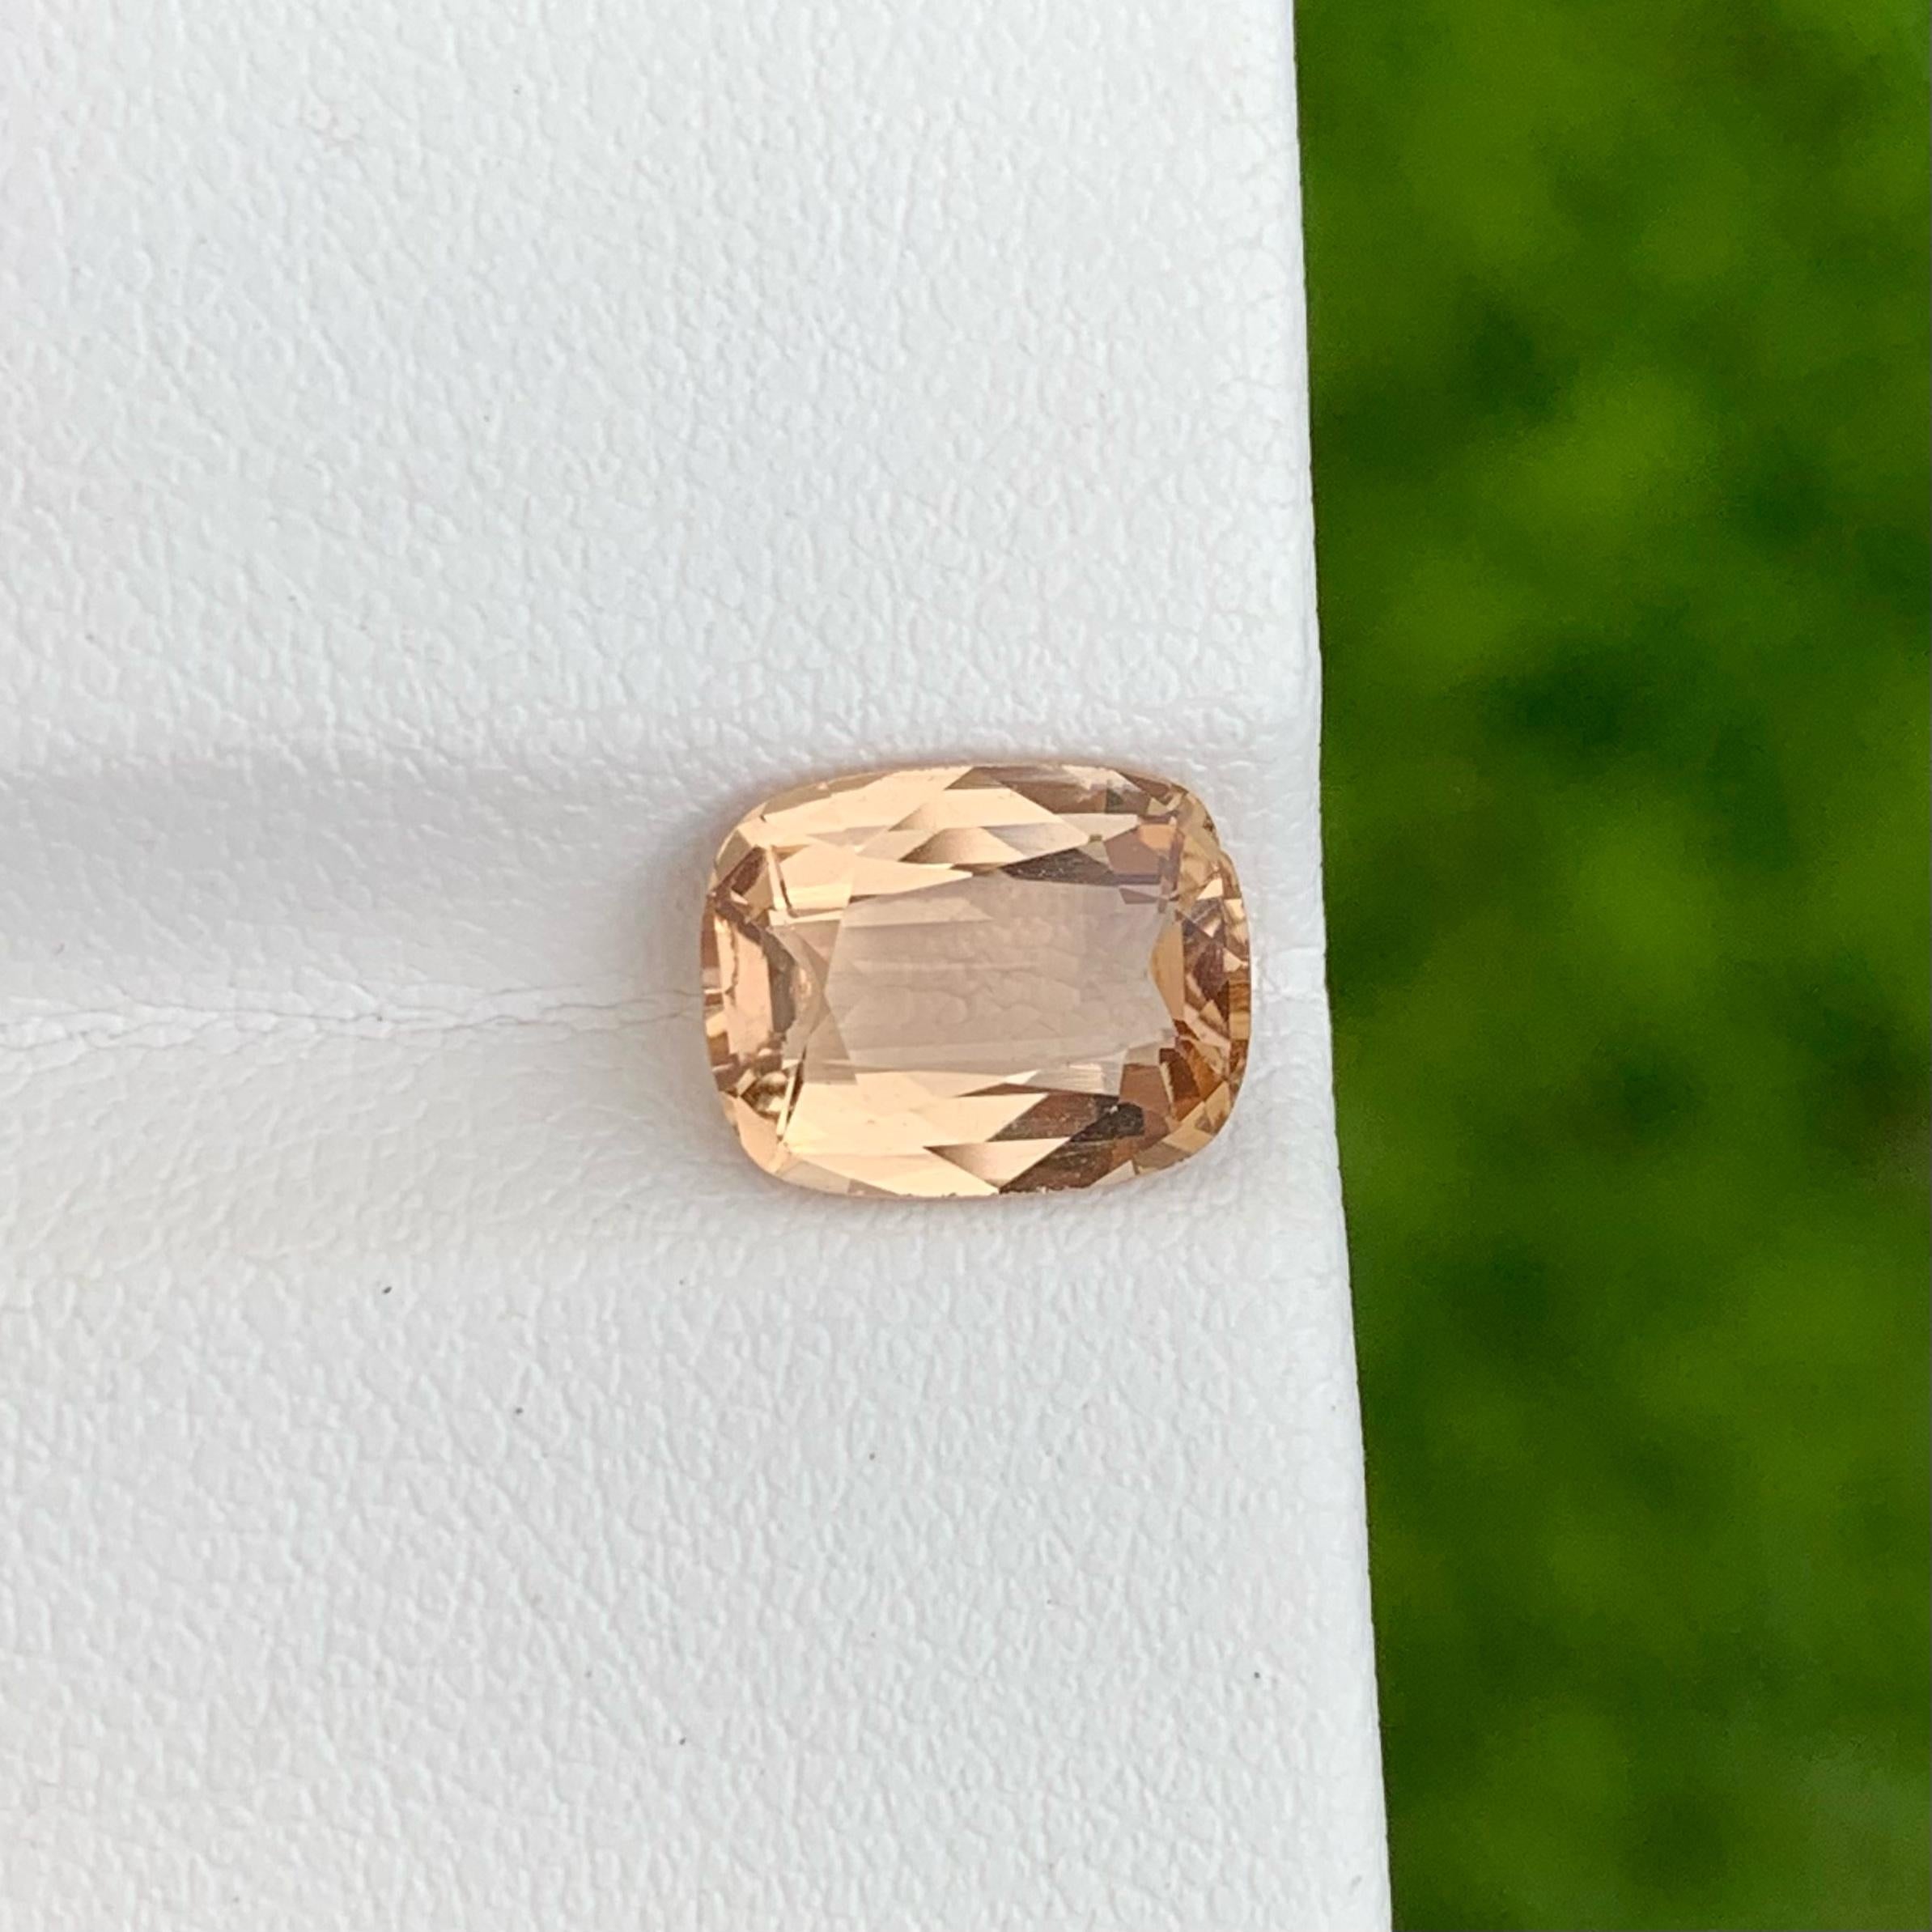 Weight 3.10 carats 
Dimensions 9.9x7.8x4.5 mm 
Treatment none 
Origin Pakistan 
Clarity Eye Clean 
Shape cushion
Cut fancy Cushion 

Imperial Natural Topaz gemstone exudes a captivating palette of deep golden tones, reminiscent of a radiant sunset